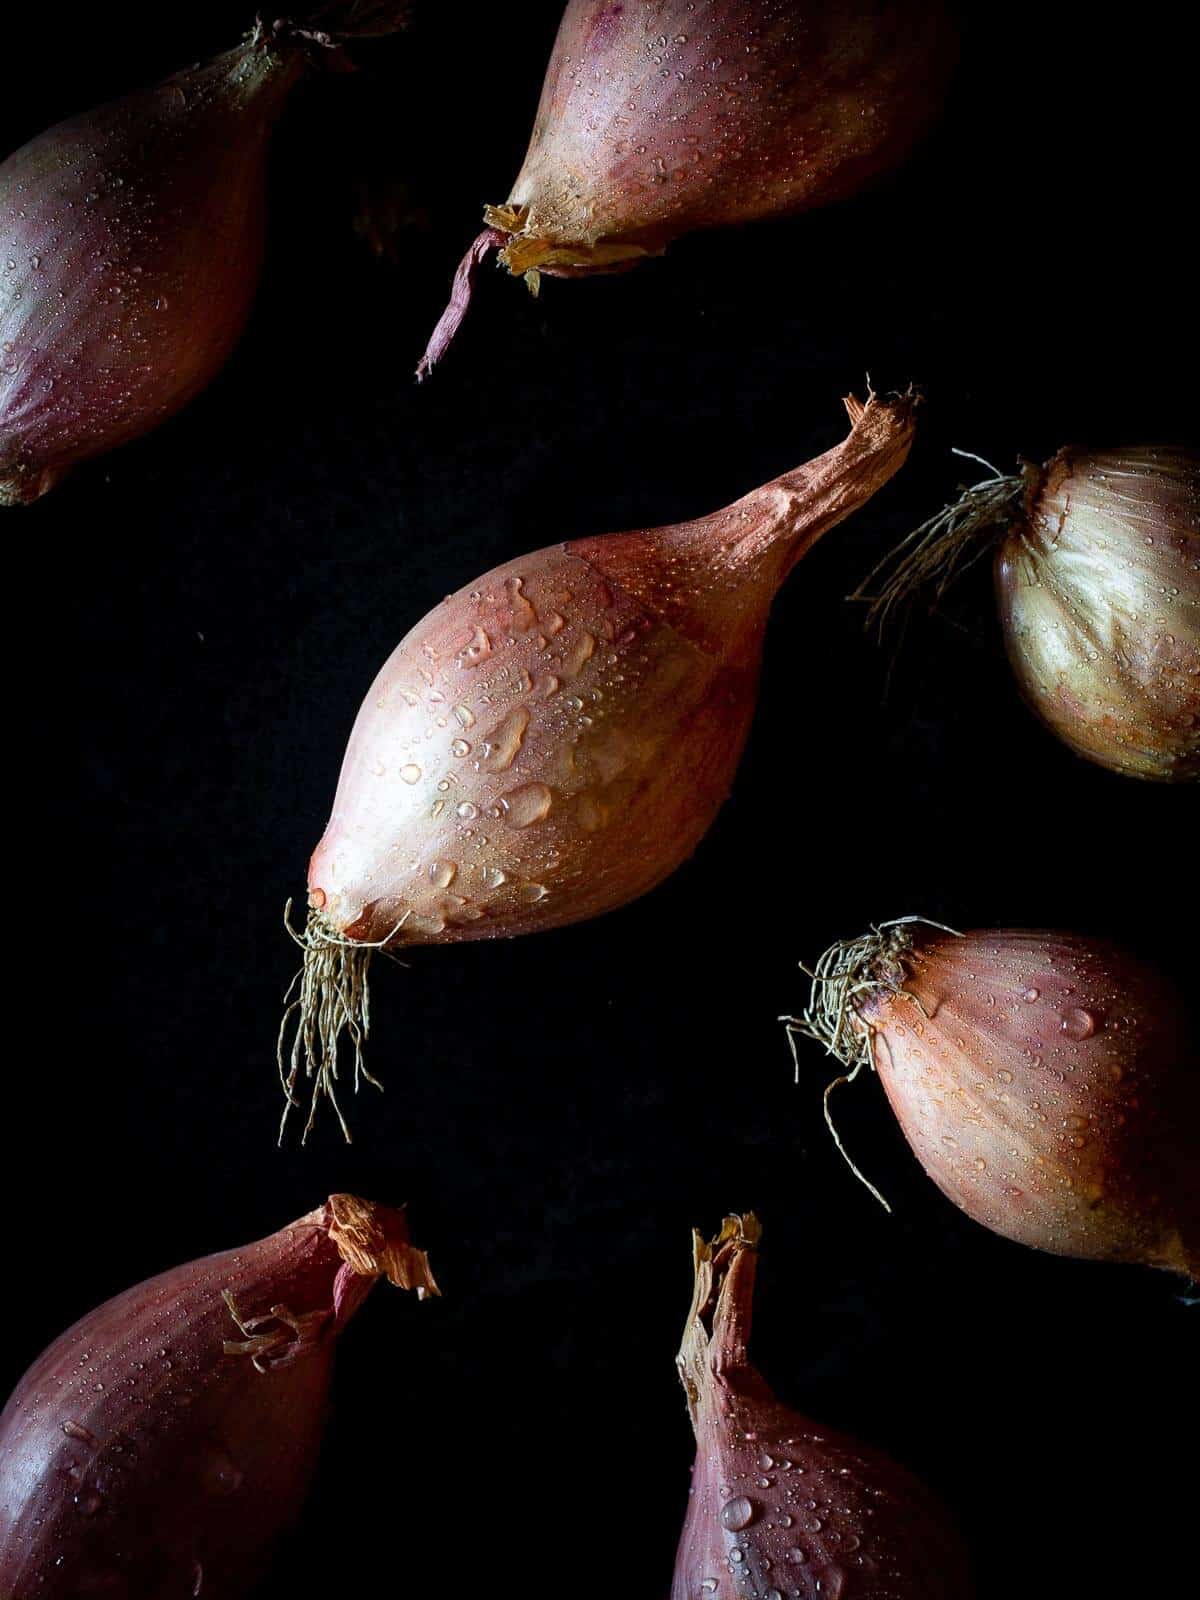 shallots as a leek replacement.